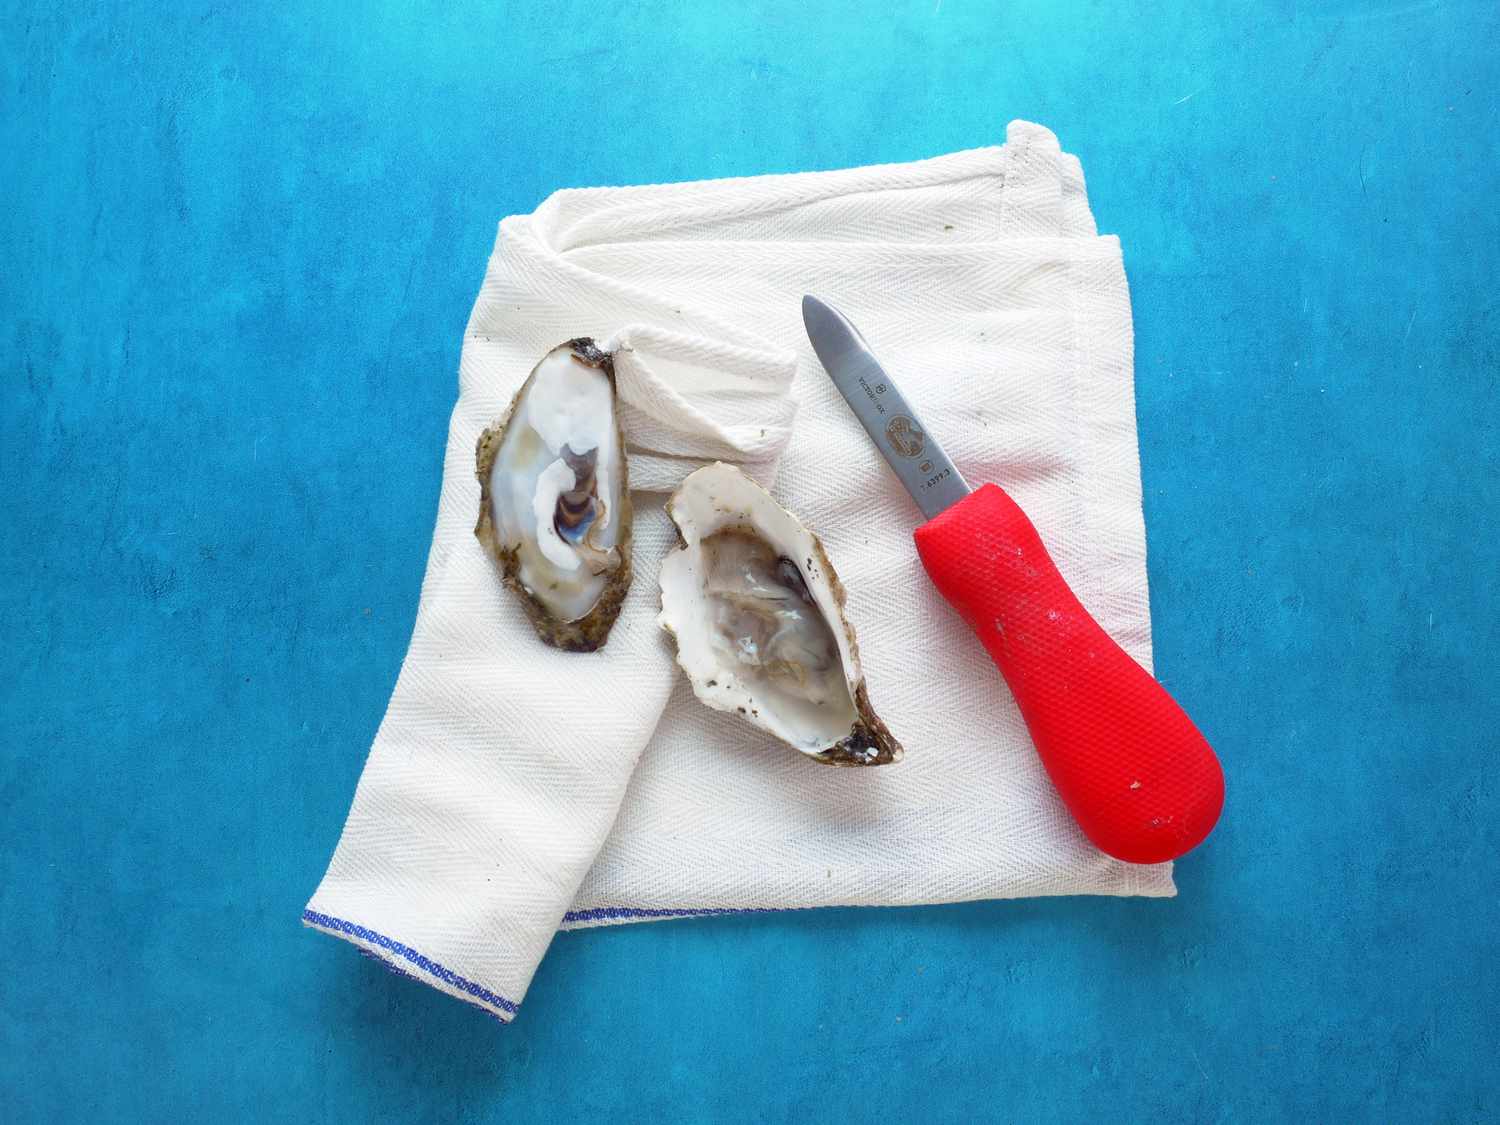 victorinox oyster knife on a folded towel with a shucked oyster